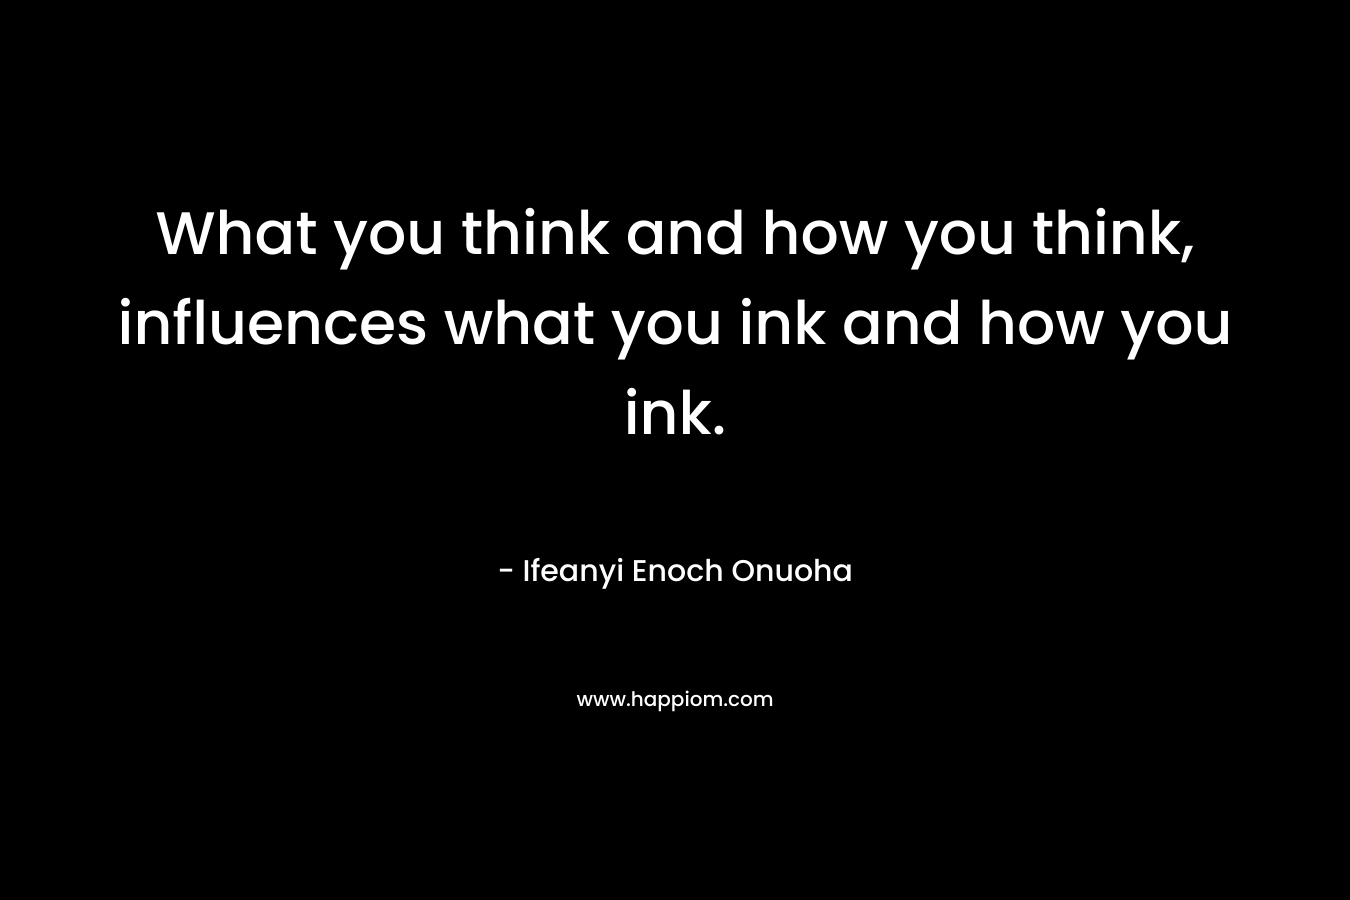 What you think and how you think, influences what you ink and how you ink. – Ifeanyi Enoch Onuoha